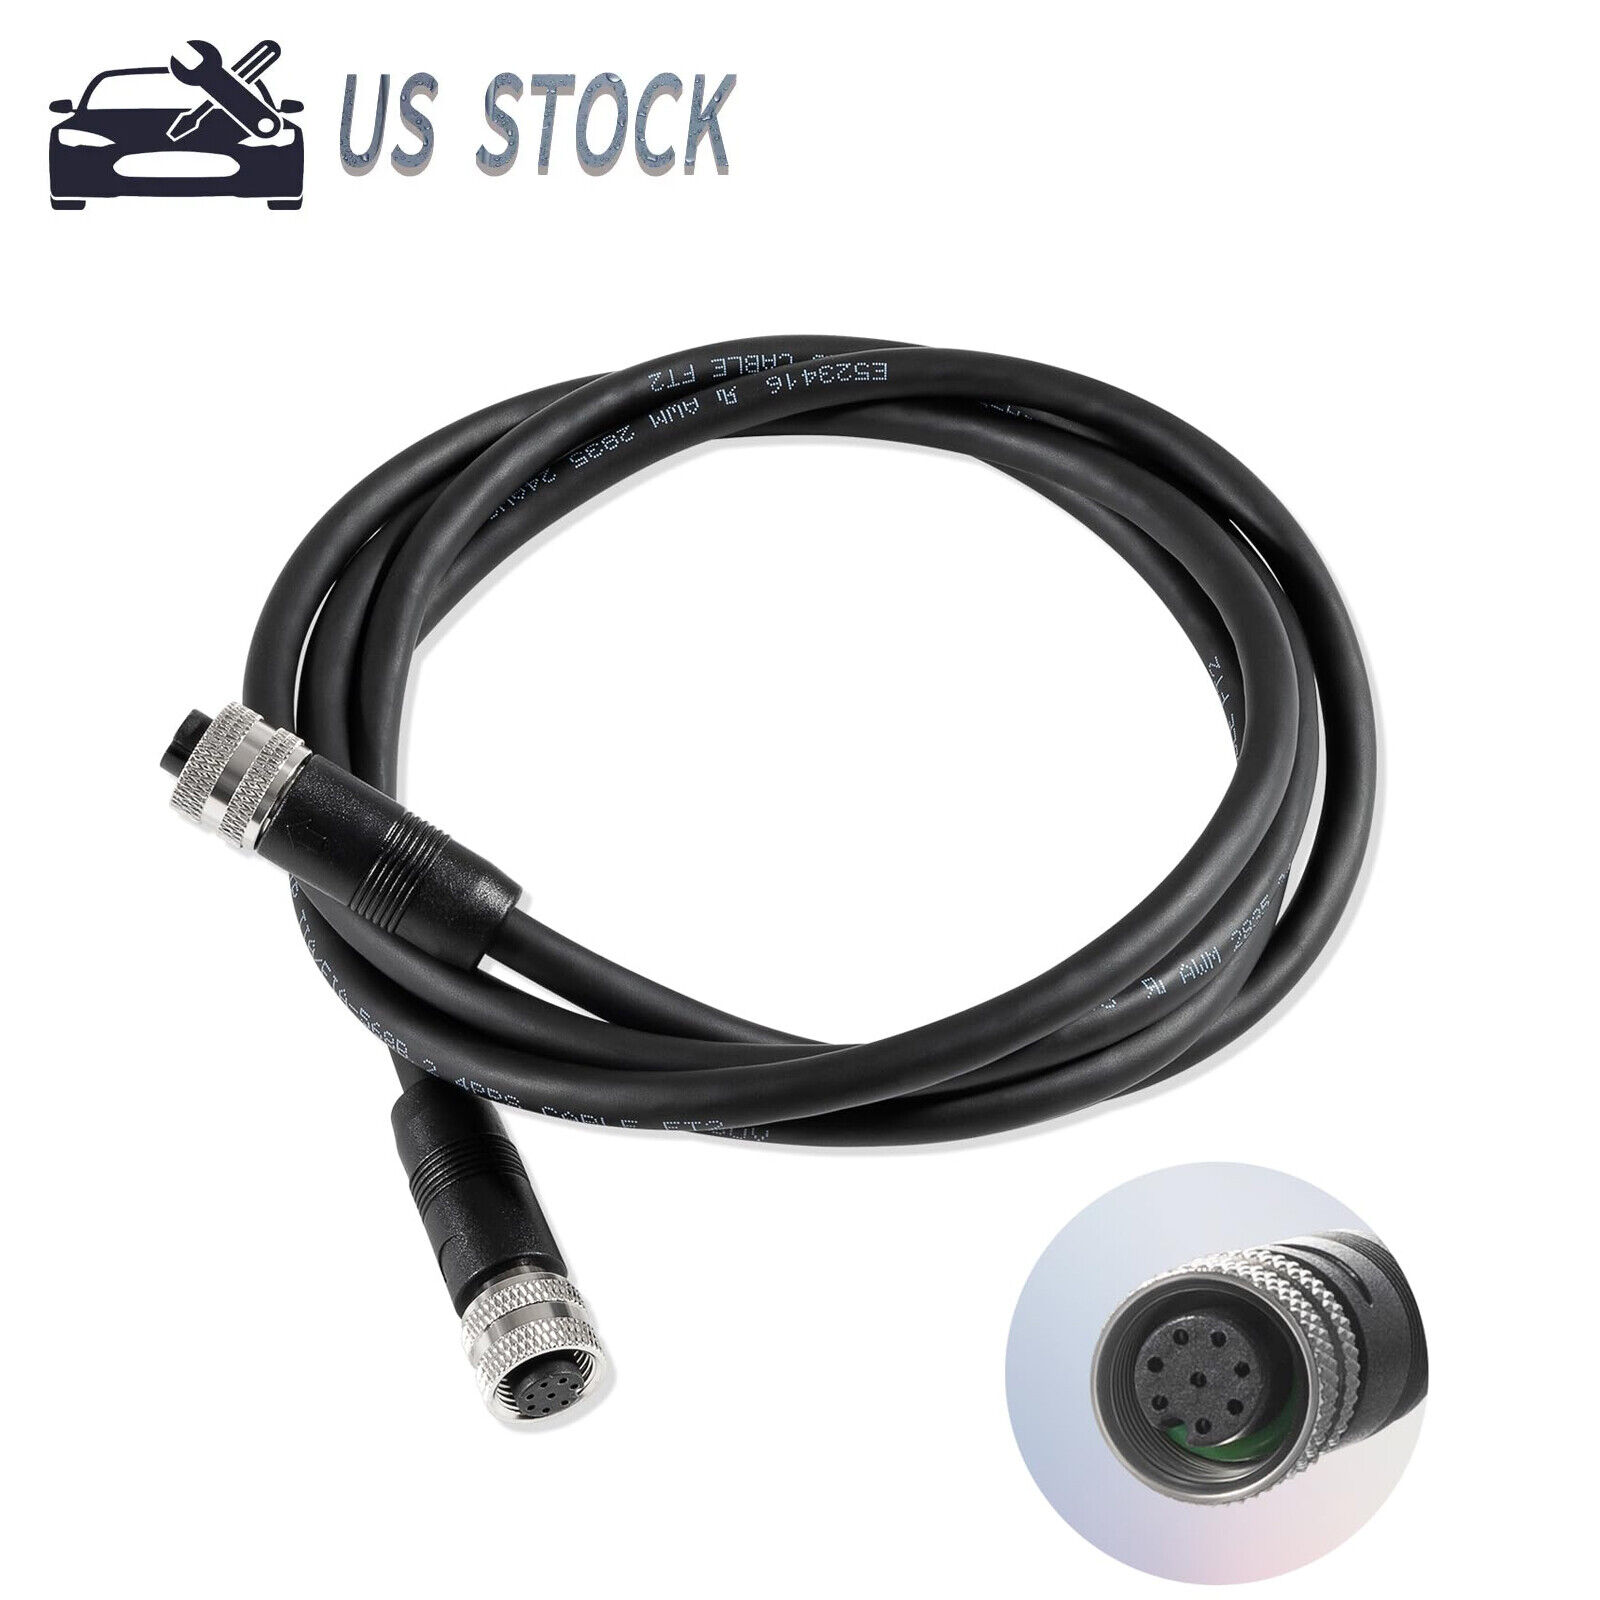 720073-6 5 Foot Ethernet Cable AS EC 5E Replace for Humminbird,Fit for APEX,Onix